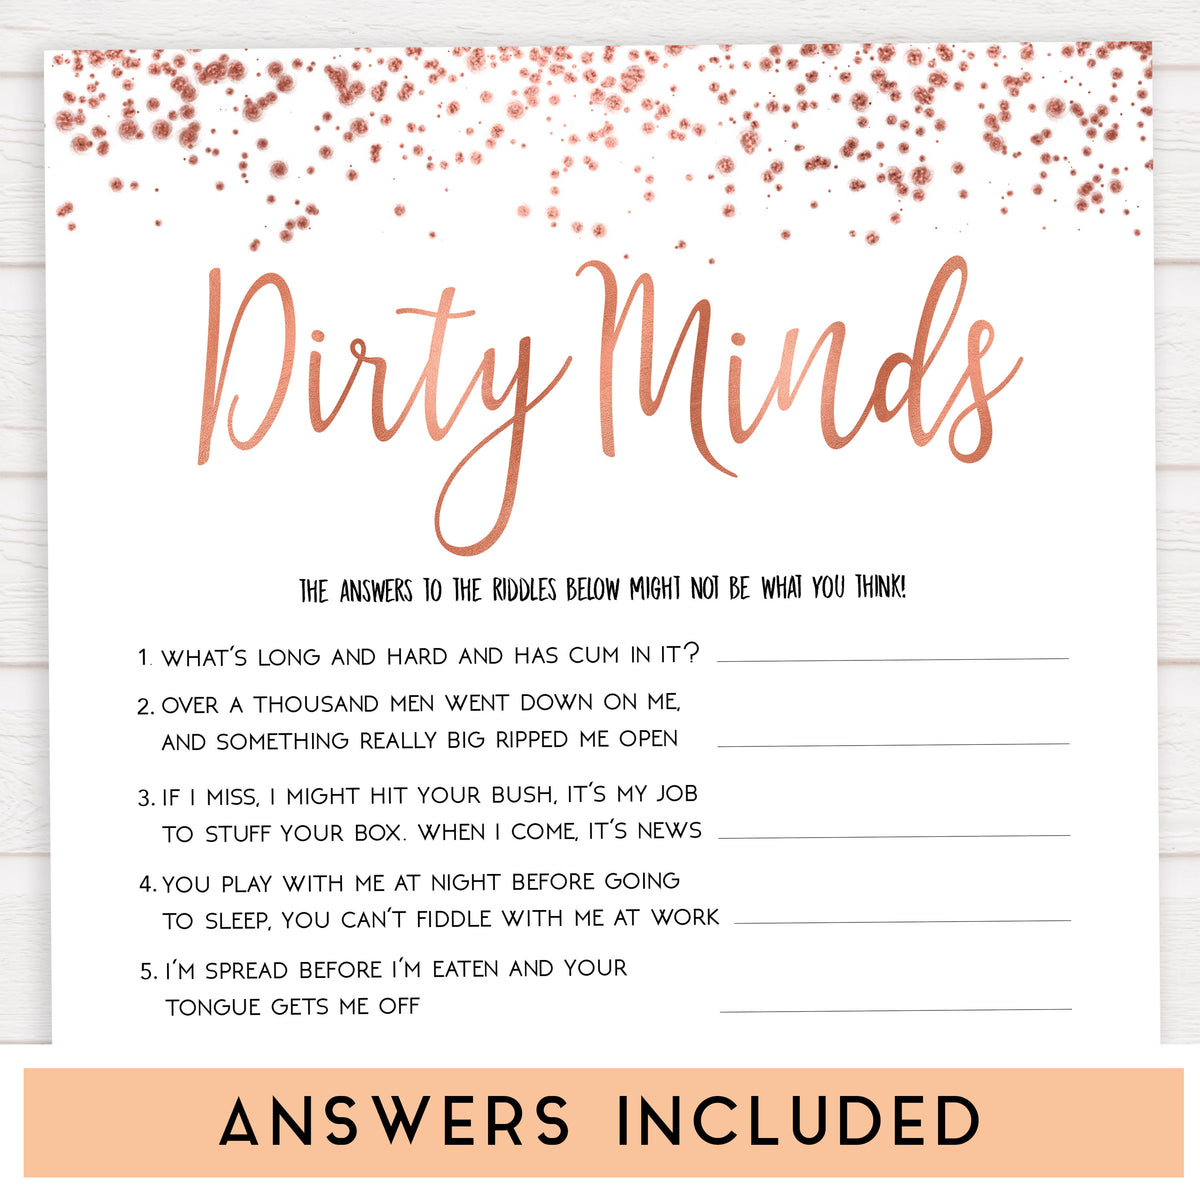 Dirty Minds Game Printable Printable Word Searches